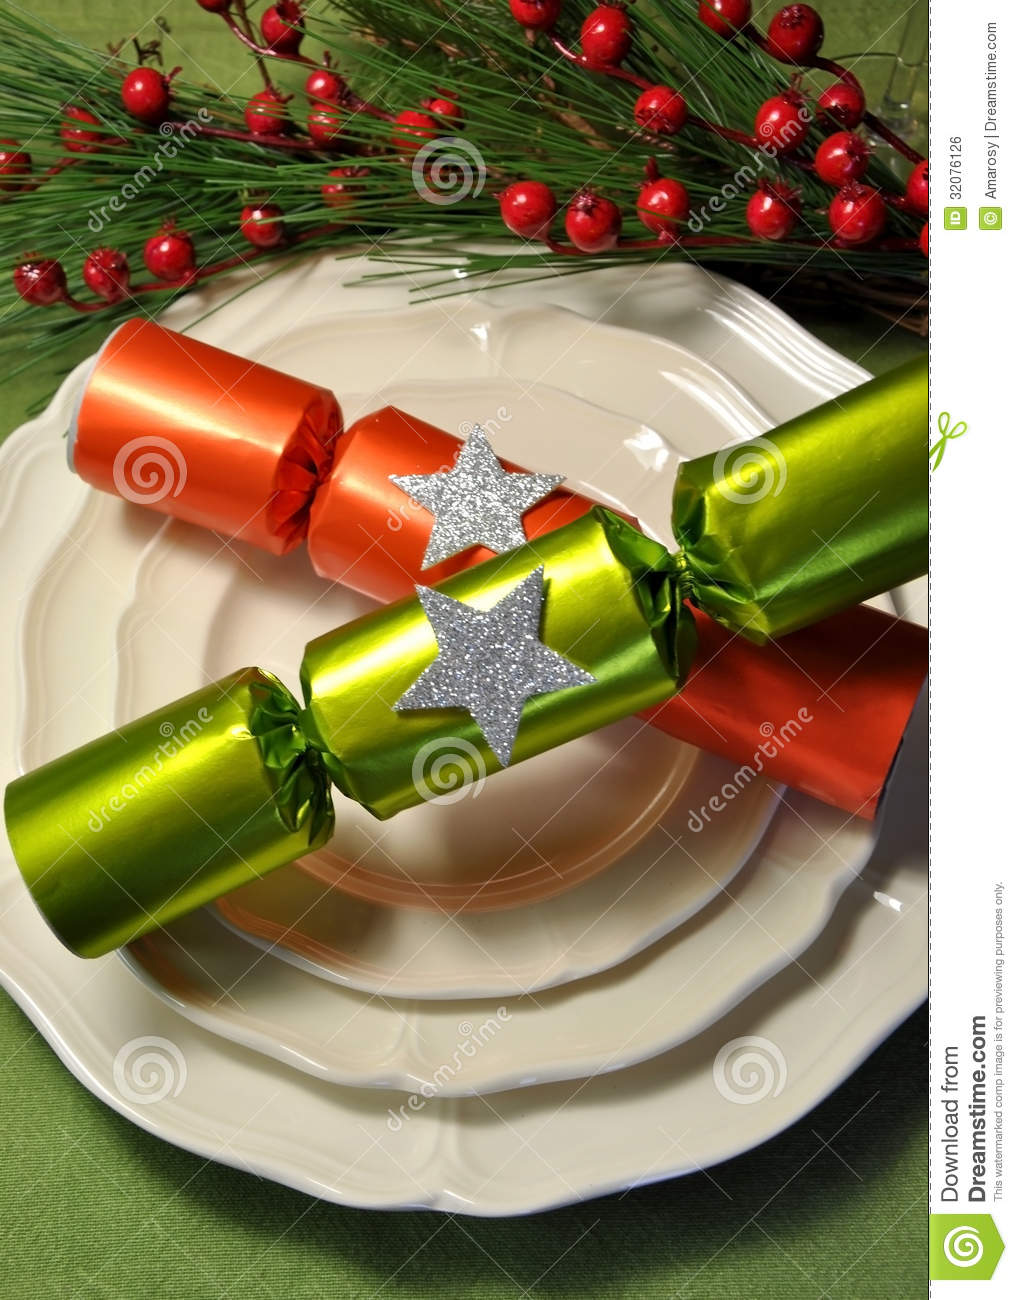 Green Theme Christmas Dining Table Setting With Fine China Plates And